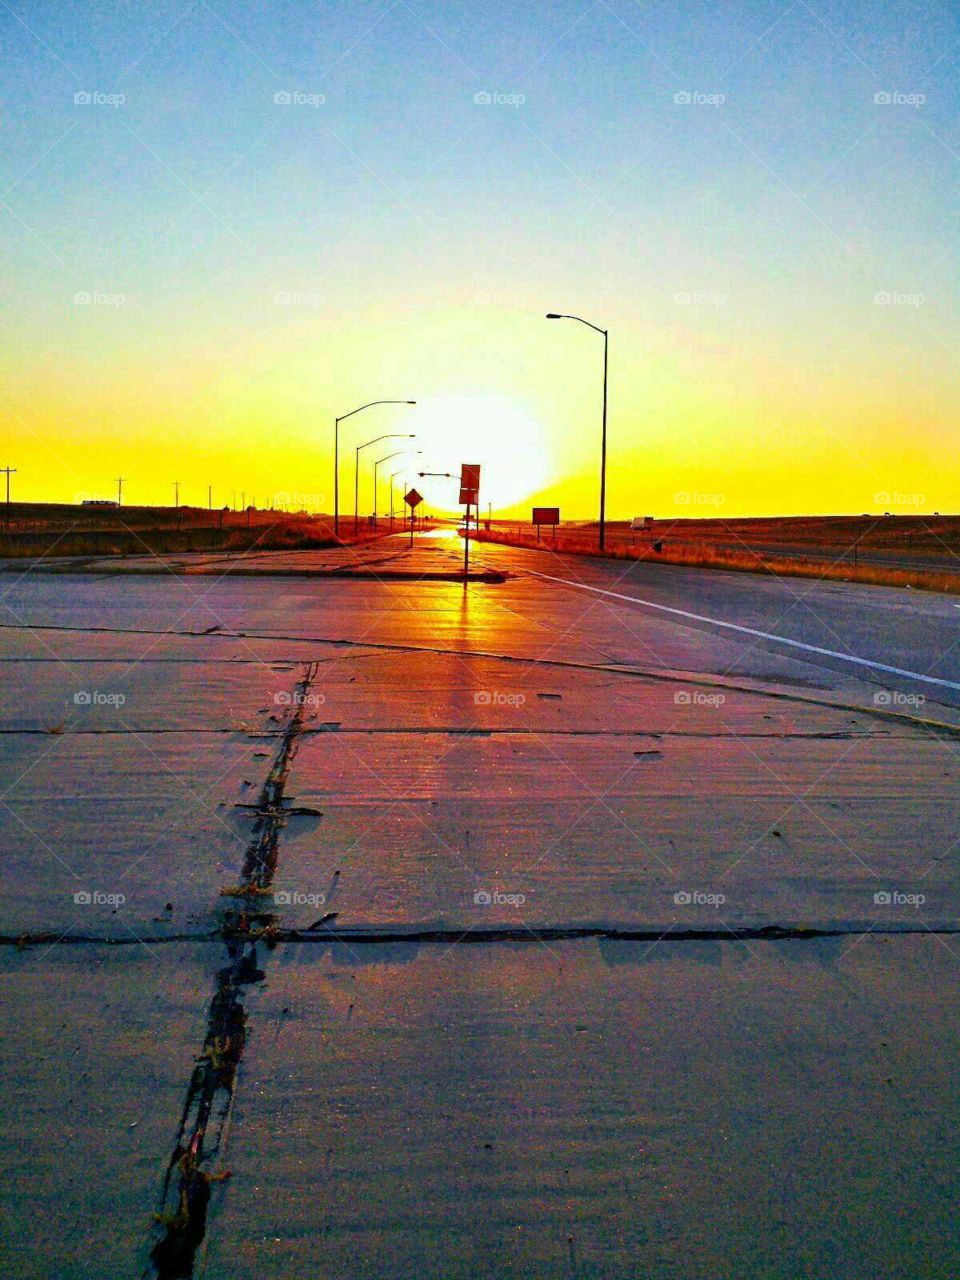 Sunrise at a truck stop. the pavement reflected the sky so well that morning.